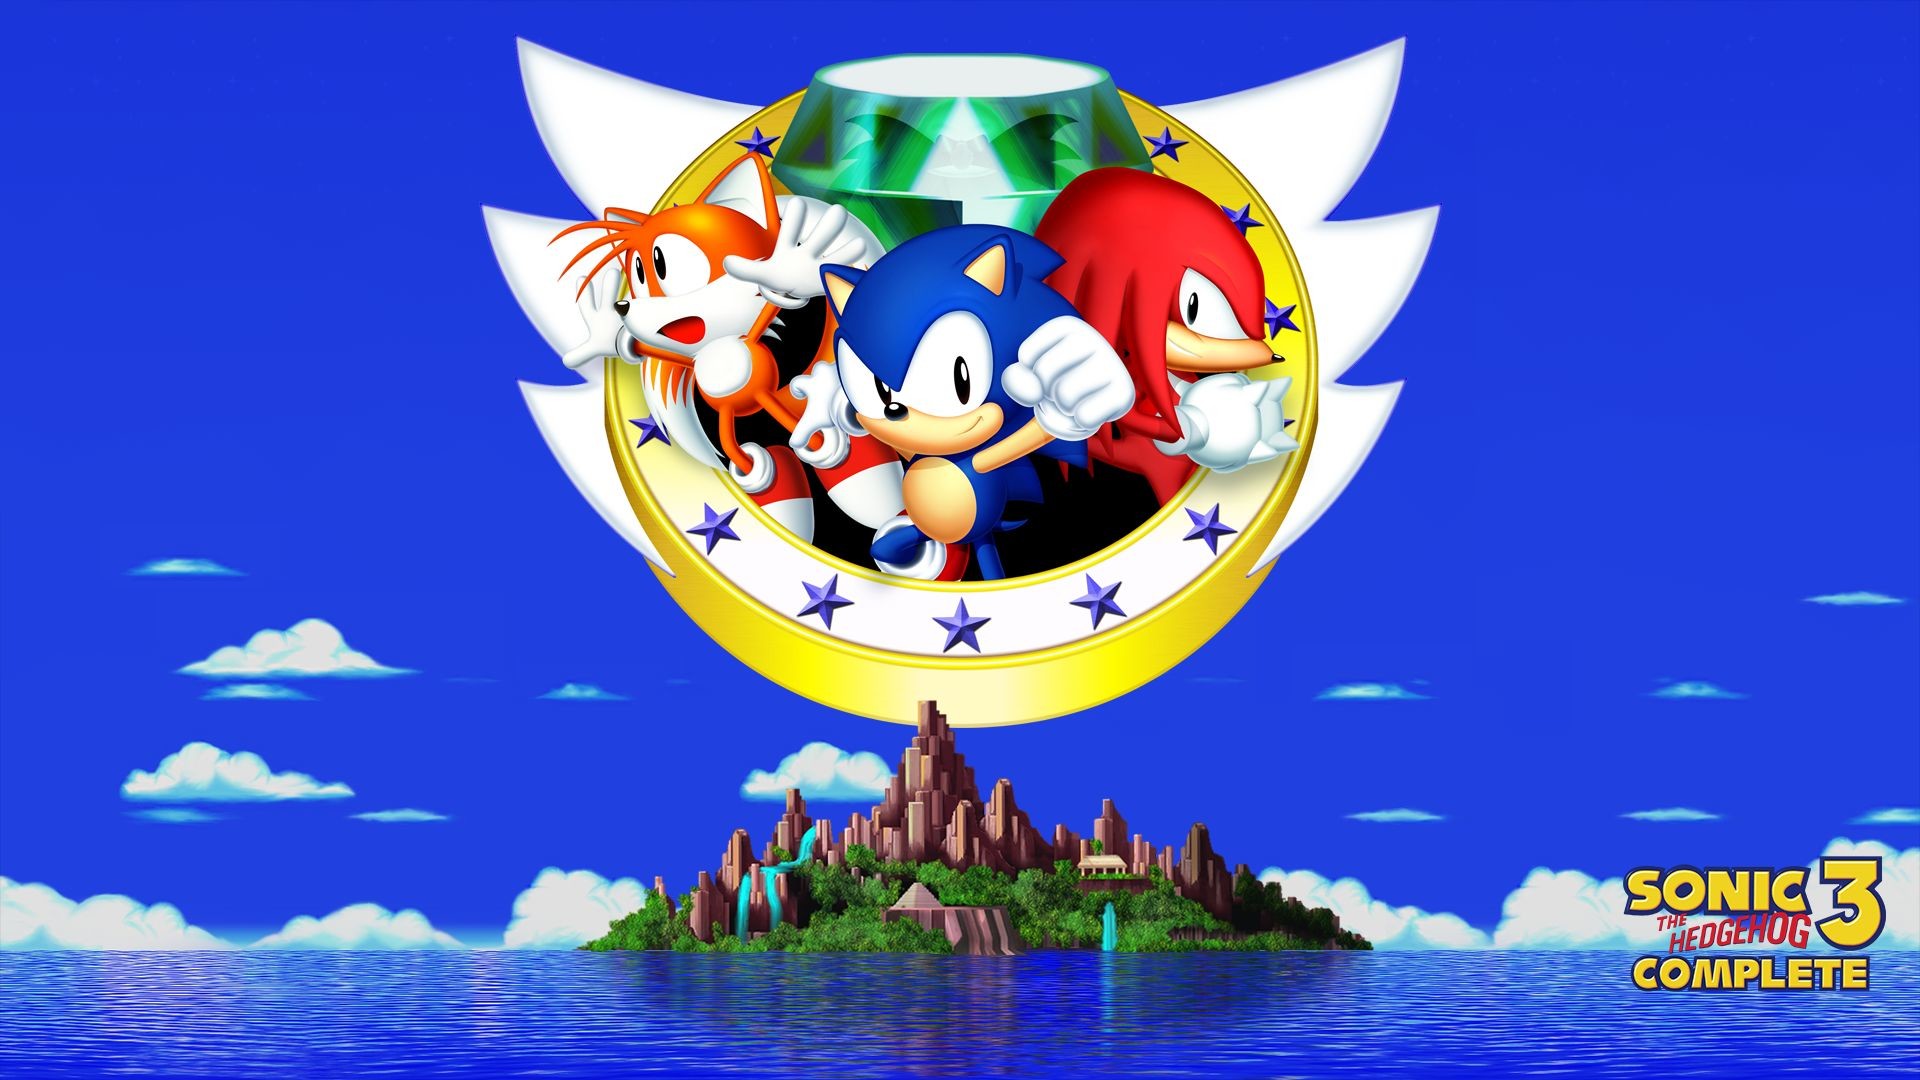 1920x1080 Video Game - Sonic the Hedgehog 3 Wallpaper